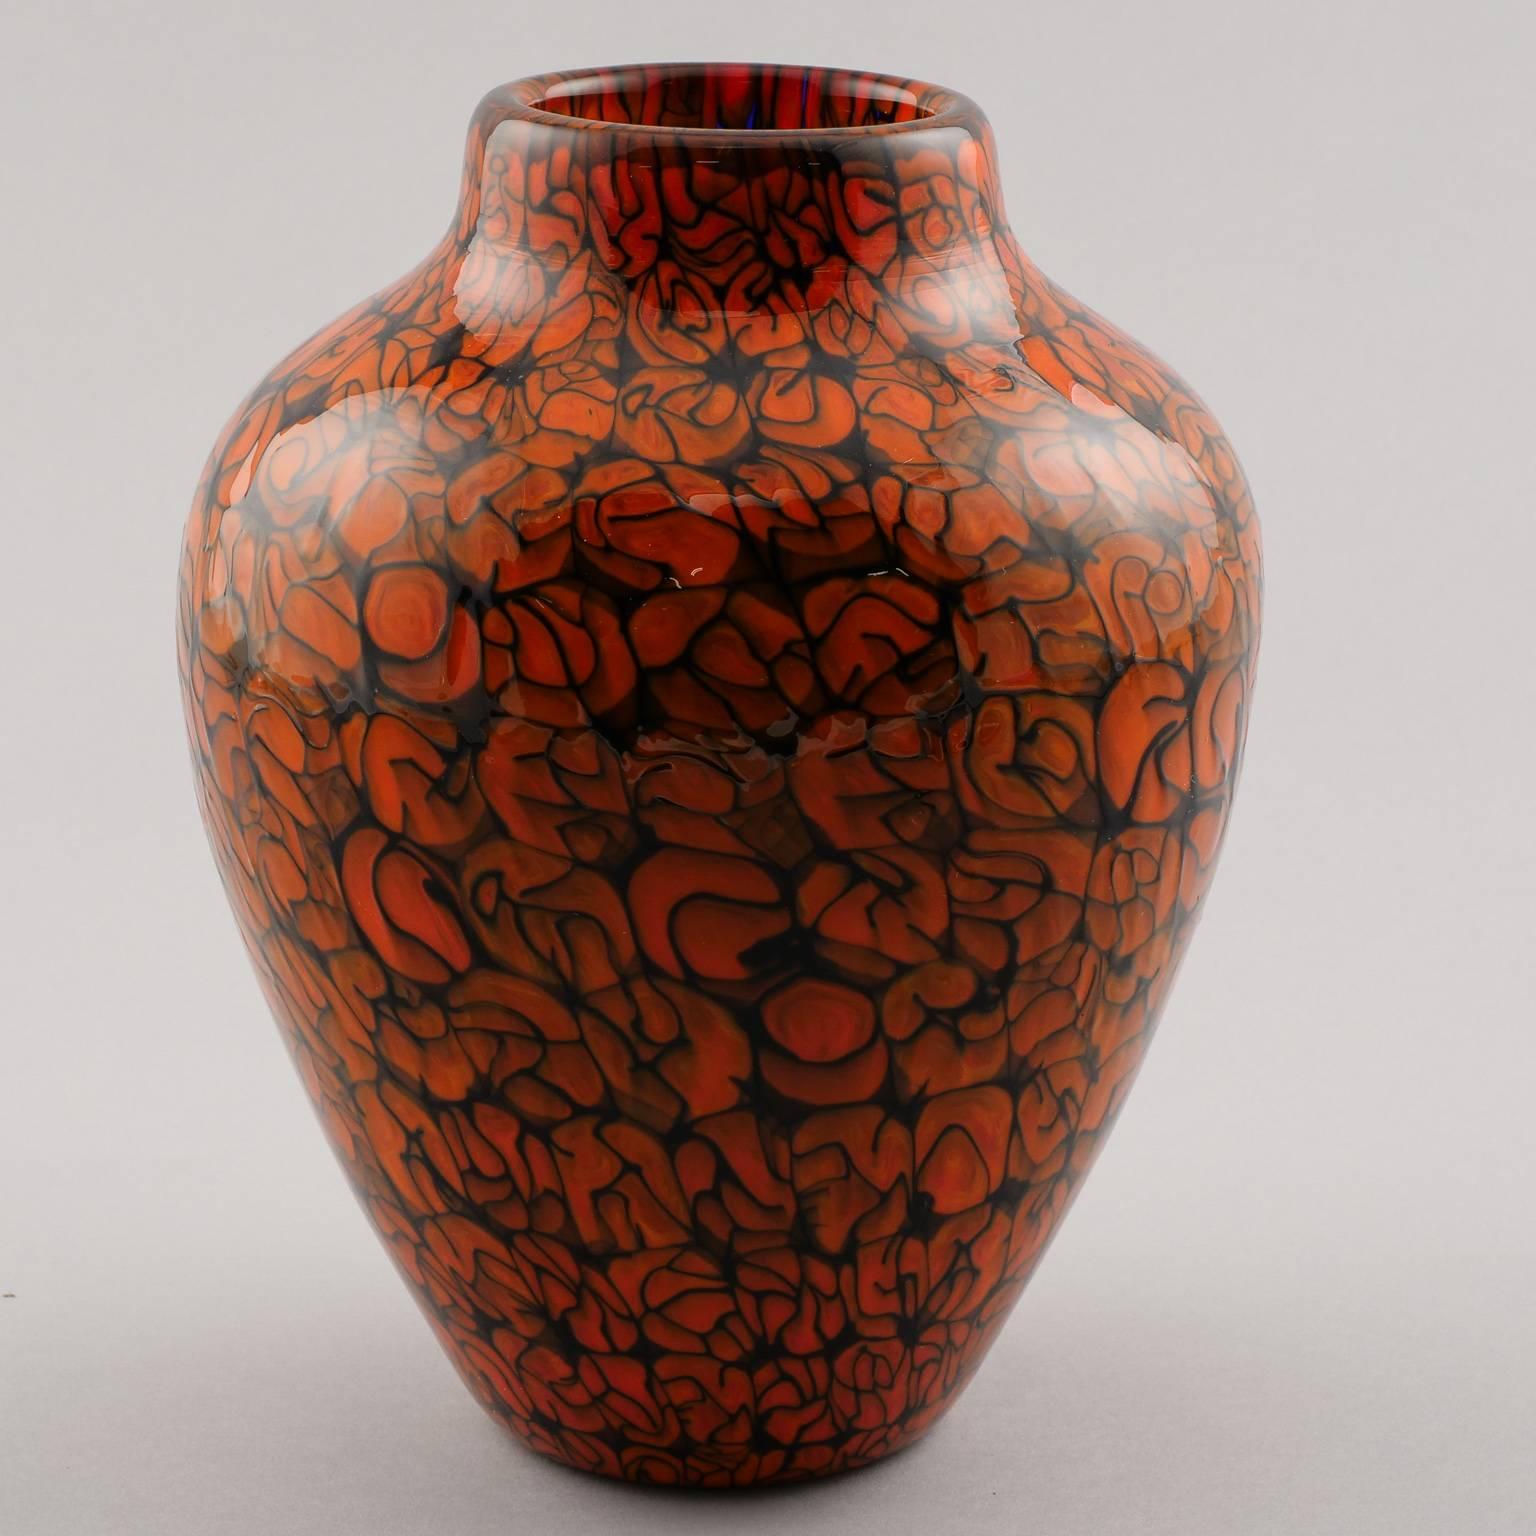 Classic form Murano glass vase by artist Marino Santi for Eugenio Ferro & Co, circa 2013. Vibrant shades of orange red and black. Engraved signature by the artist on underside, original card from manufacturer. New condition with no flaws found.